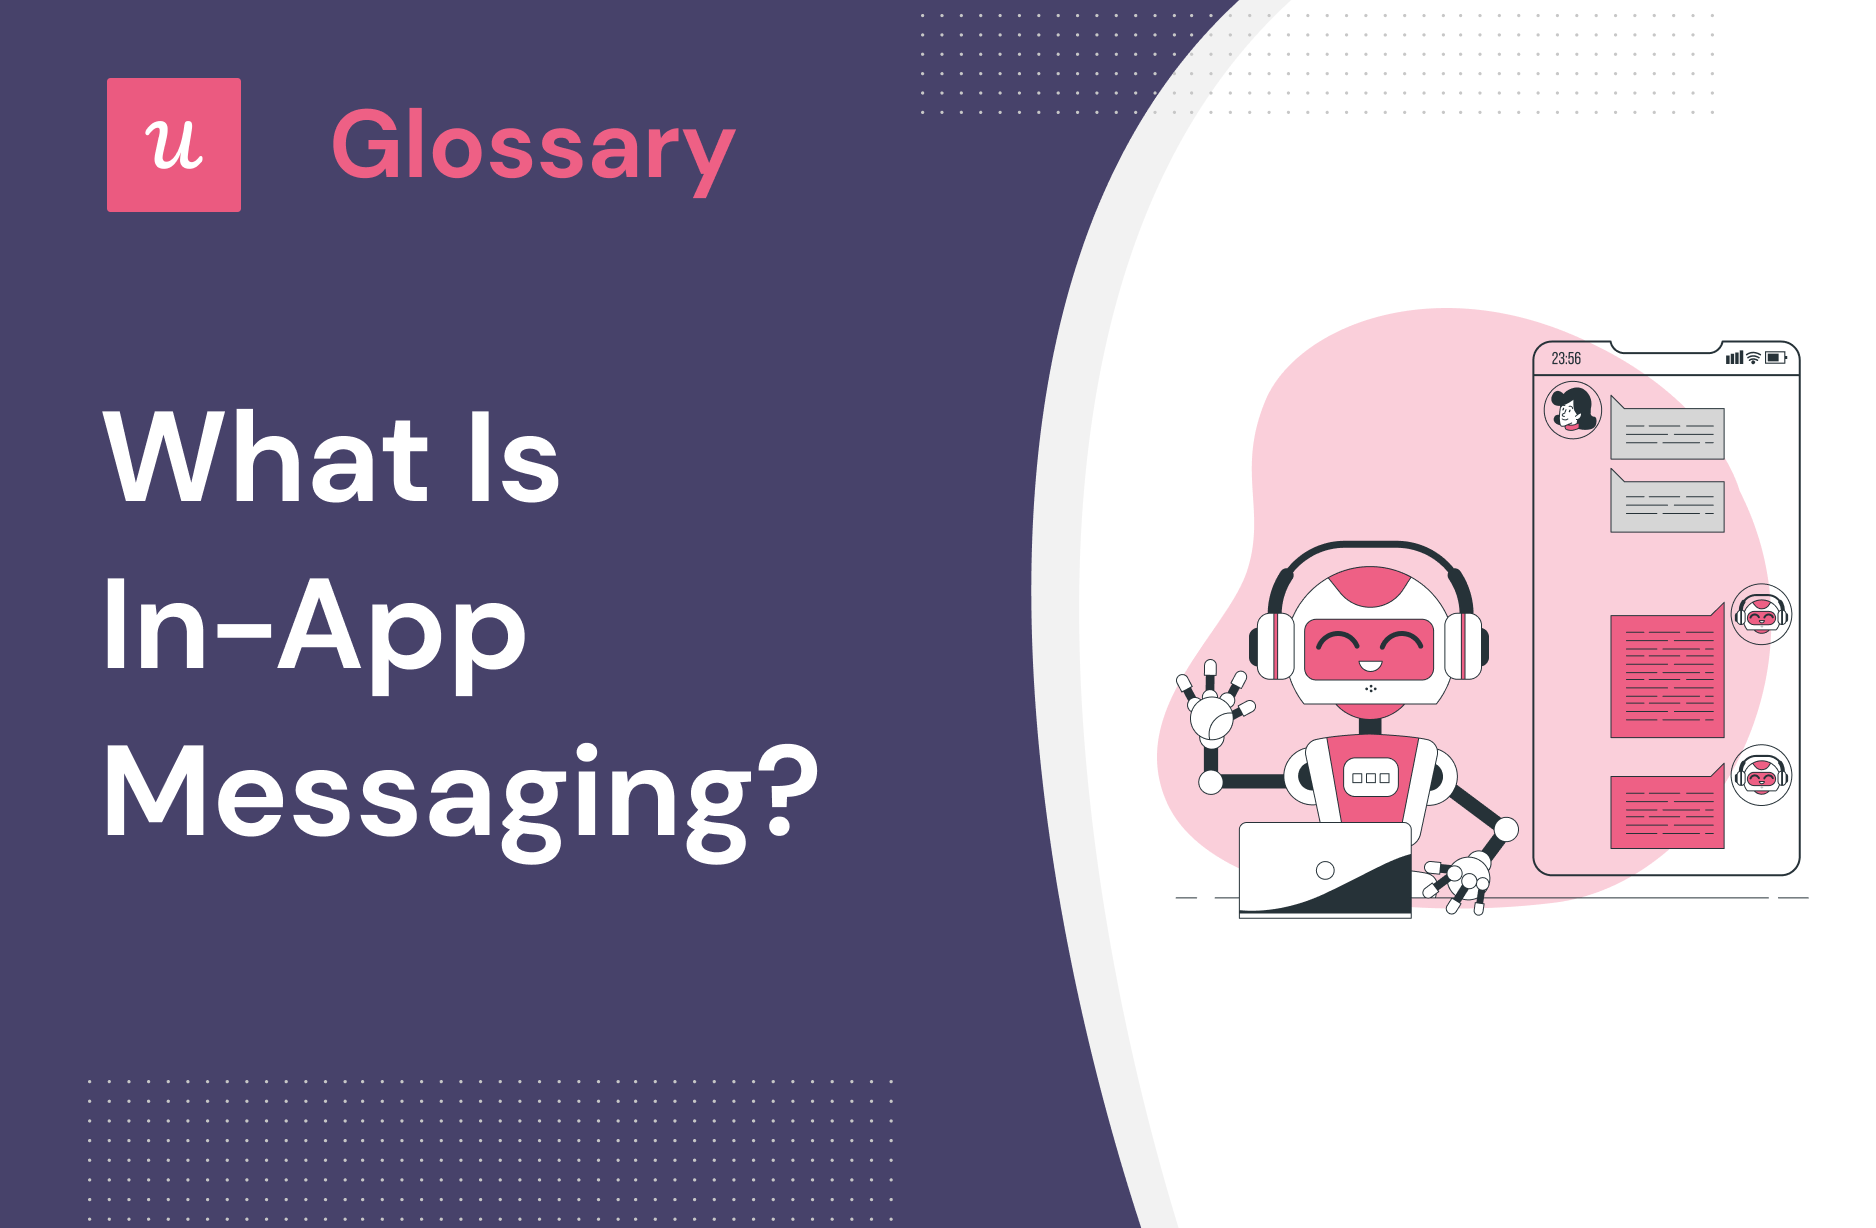 What is In-App Messaging?